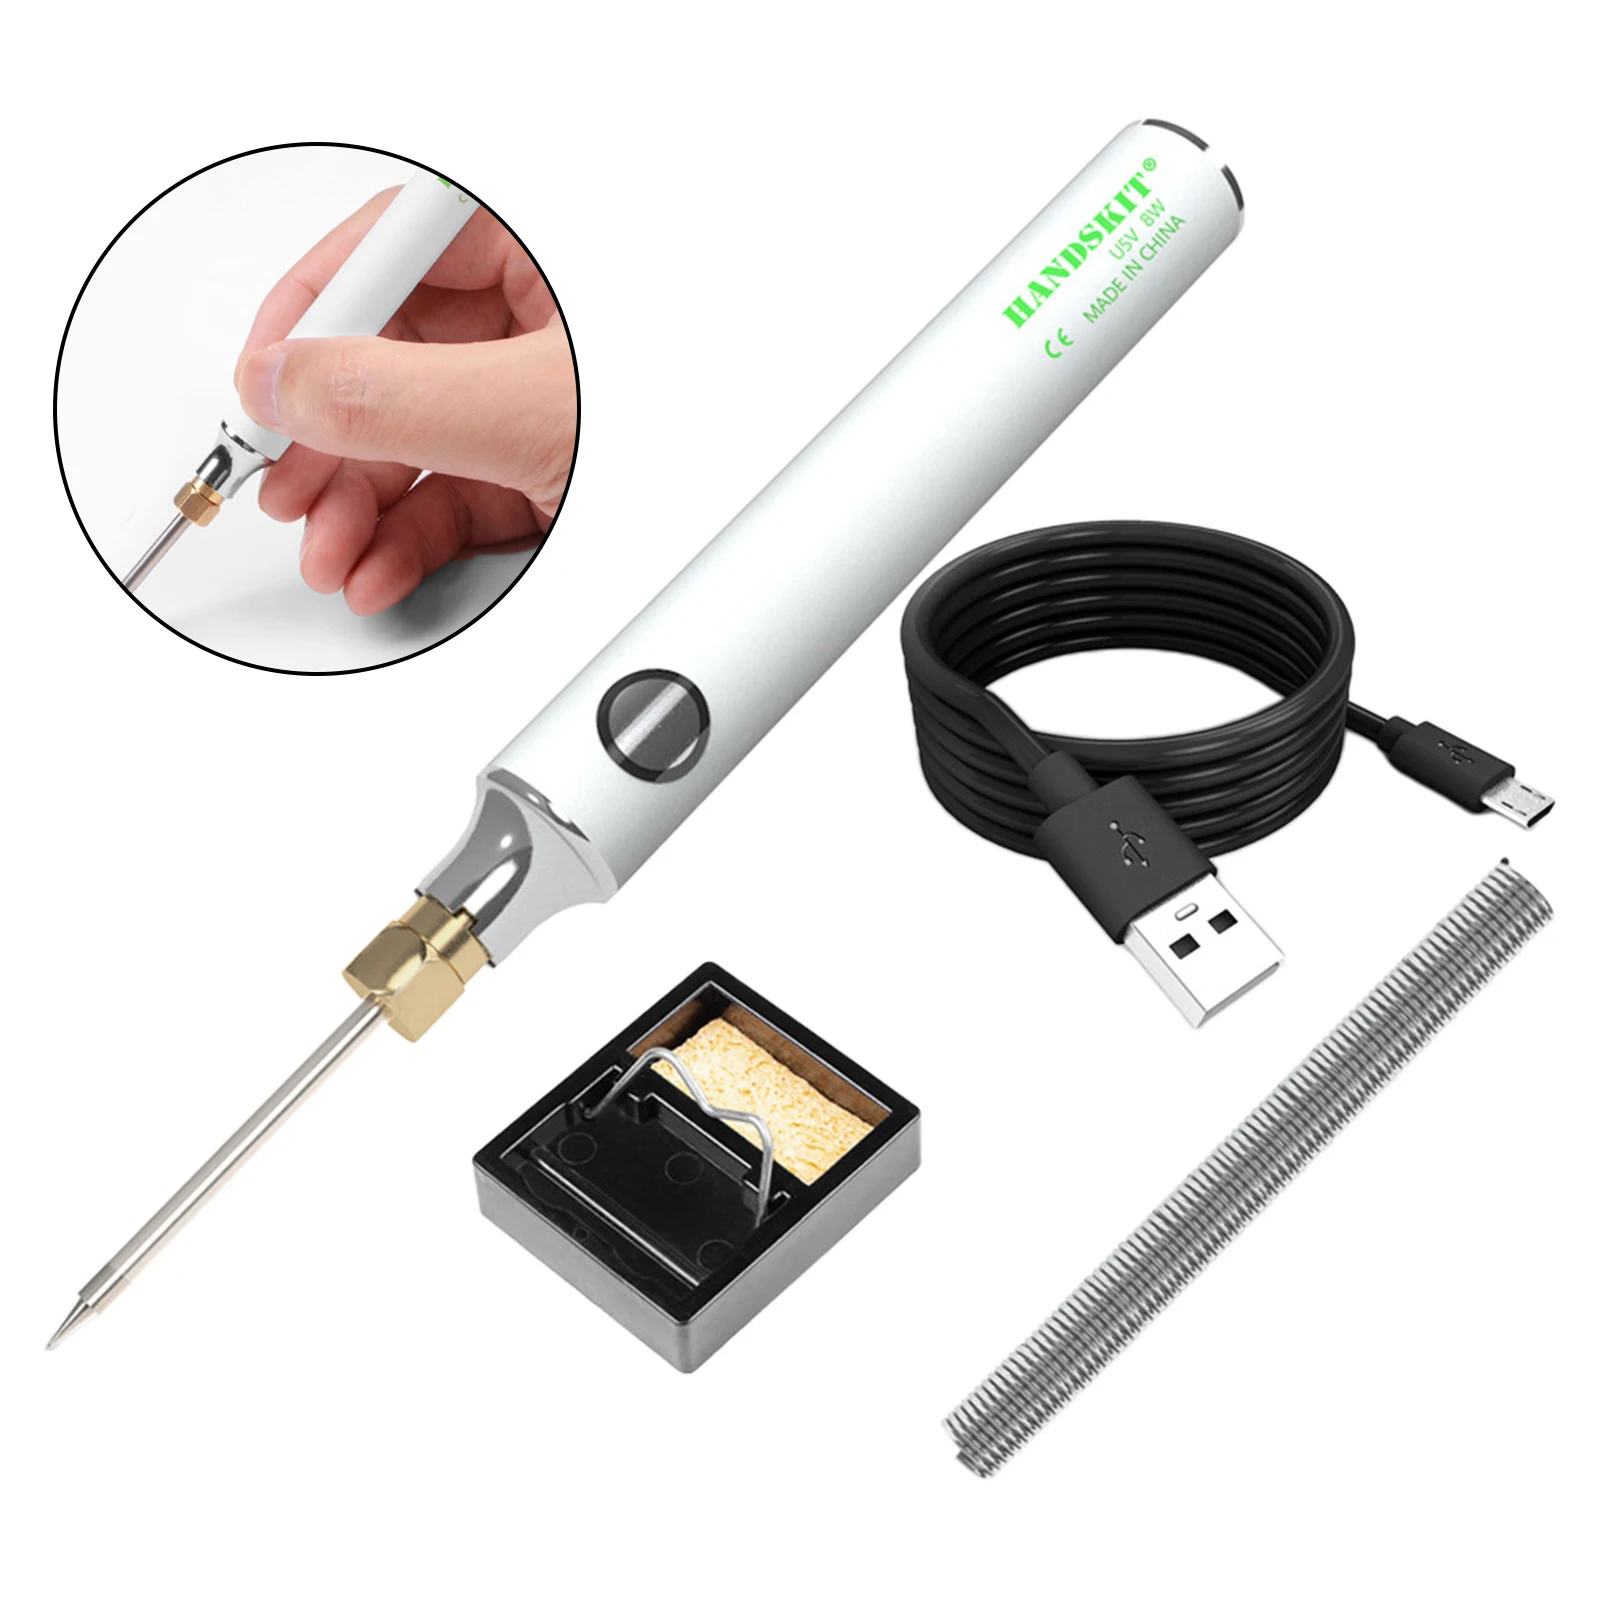 Electric Soldering Iron USB Welding Iron Adjustable Temperature with Solder Stand DIY for SMD Work